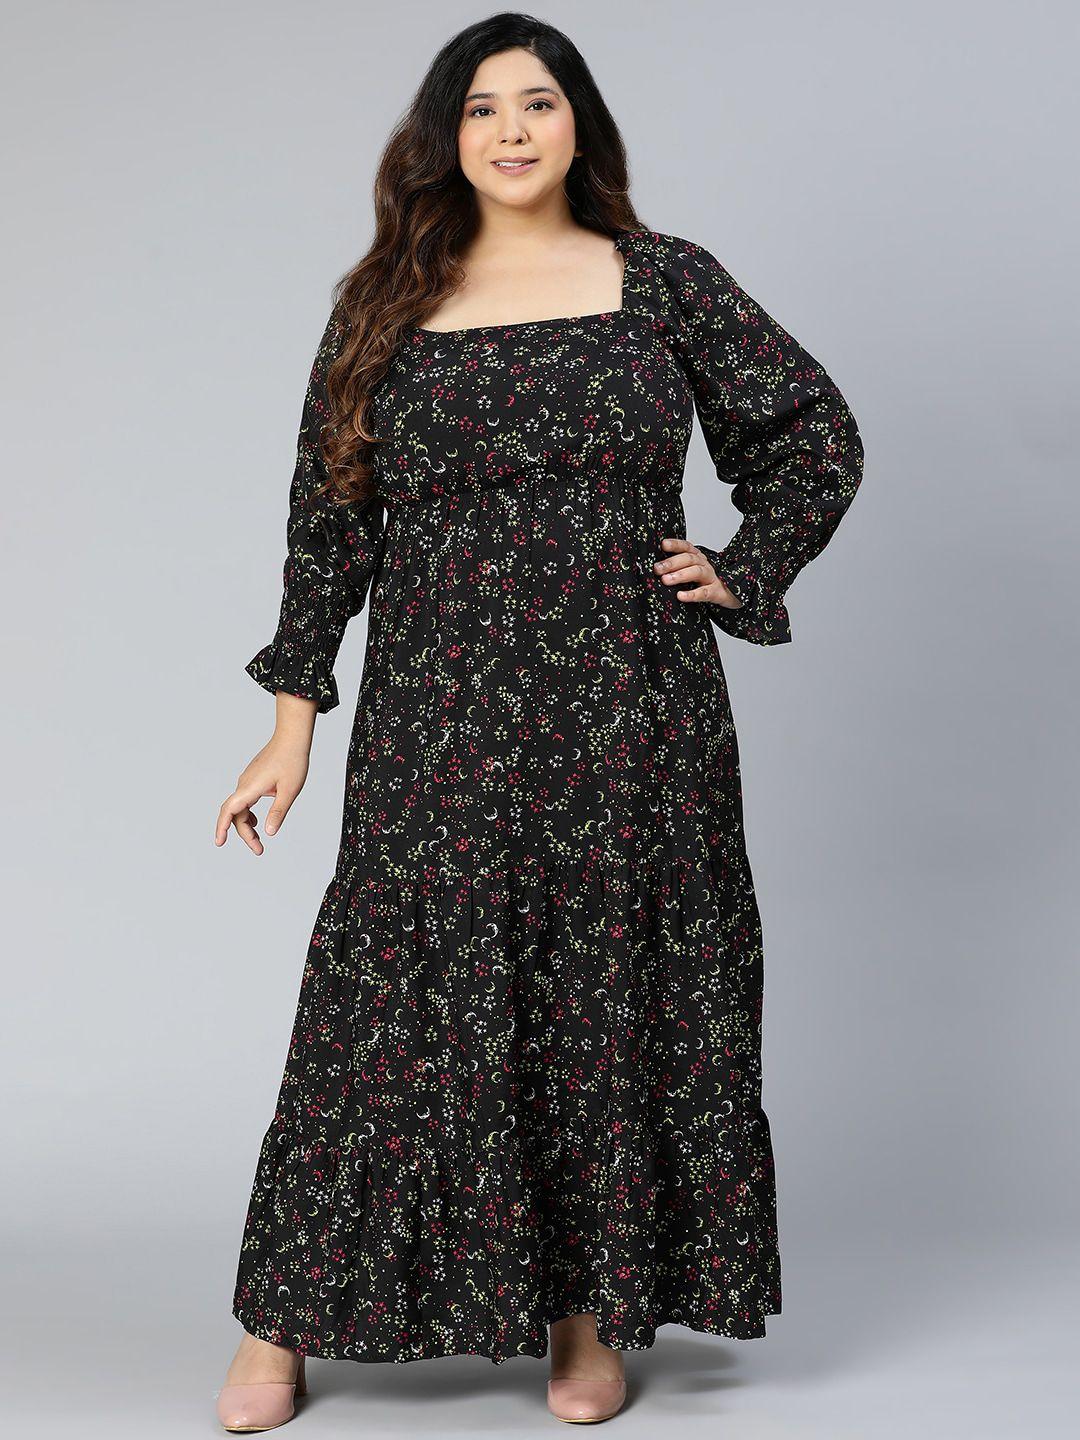 oxolloxo-plus-size-floral-printed-puff-sleeves-ruffled-maxi-dress